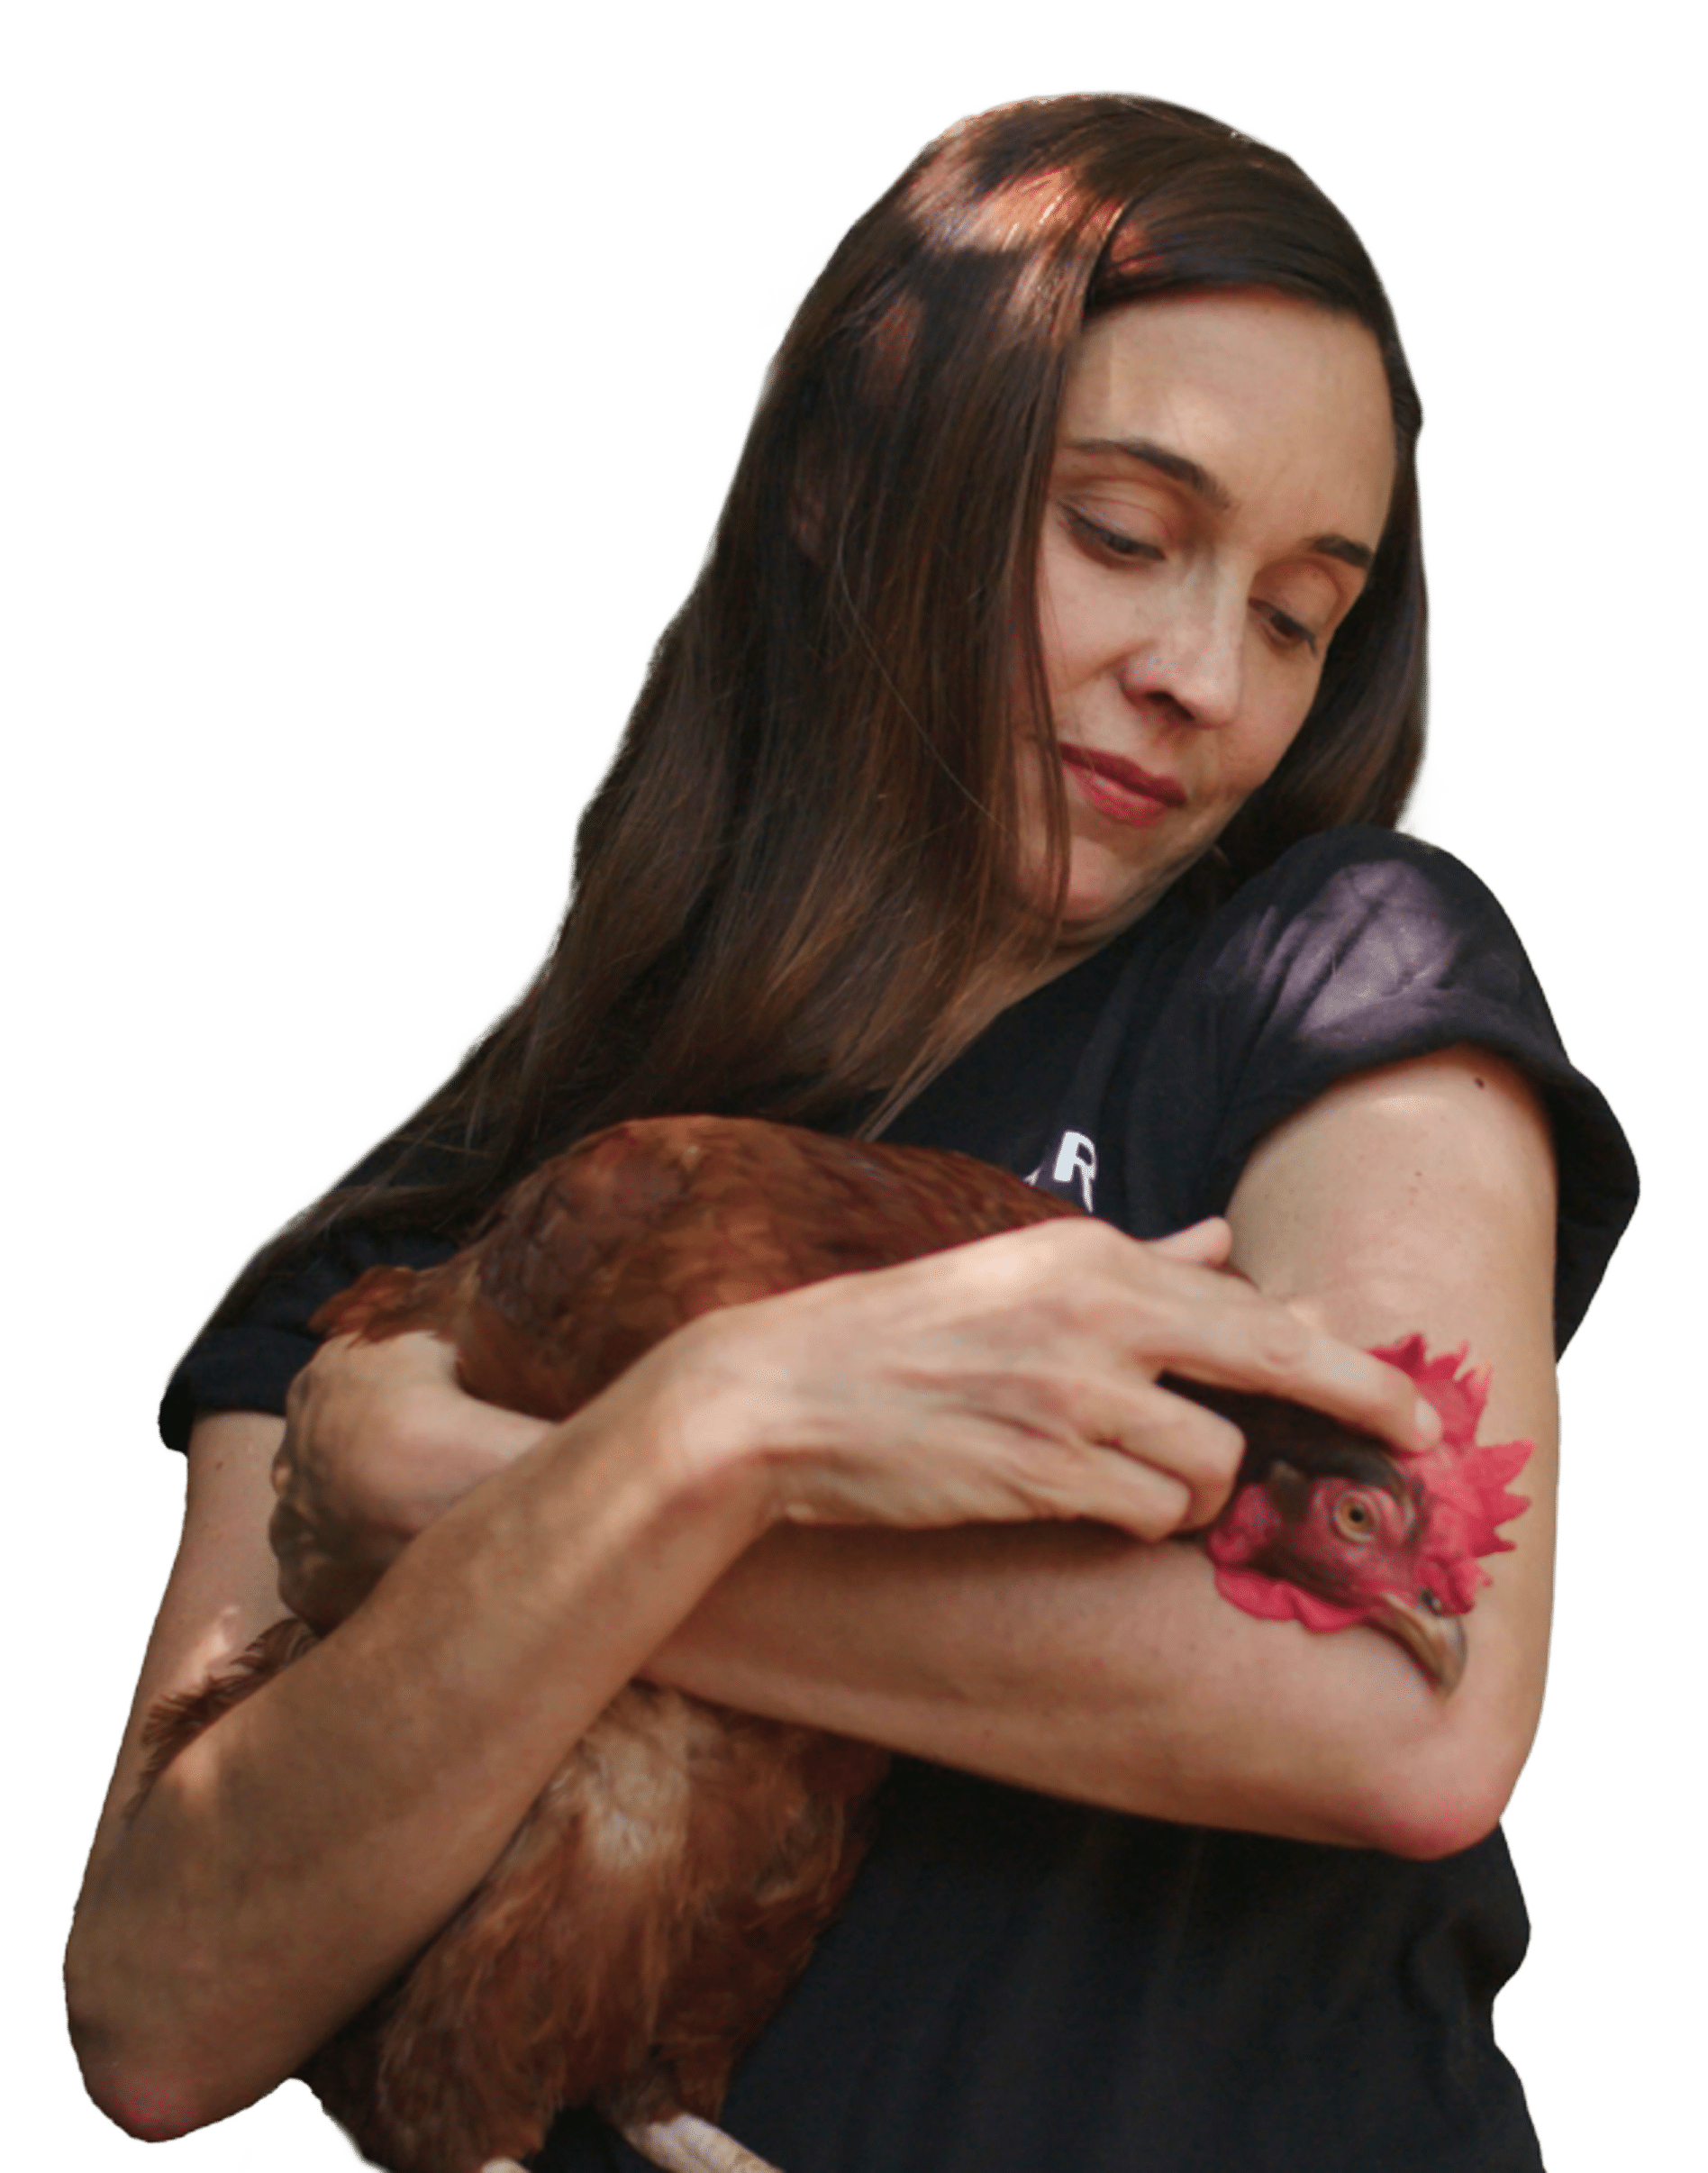 Leah Garcés holding a brown hen in her arms and smiling gently.